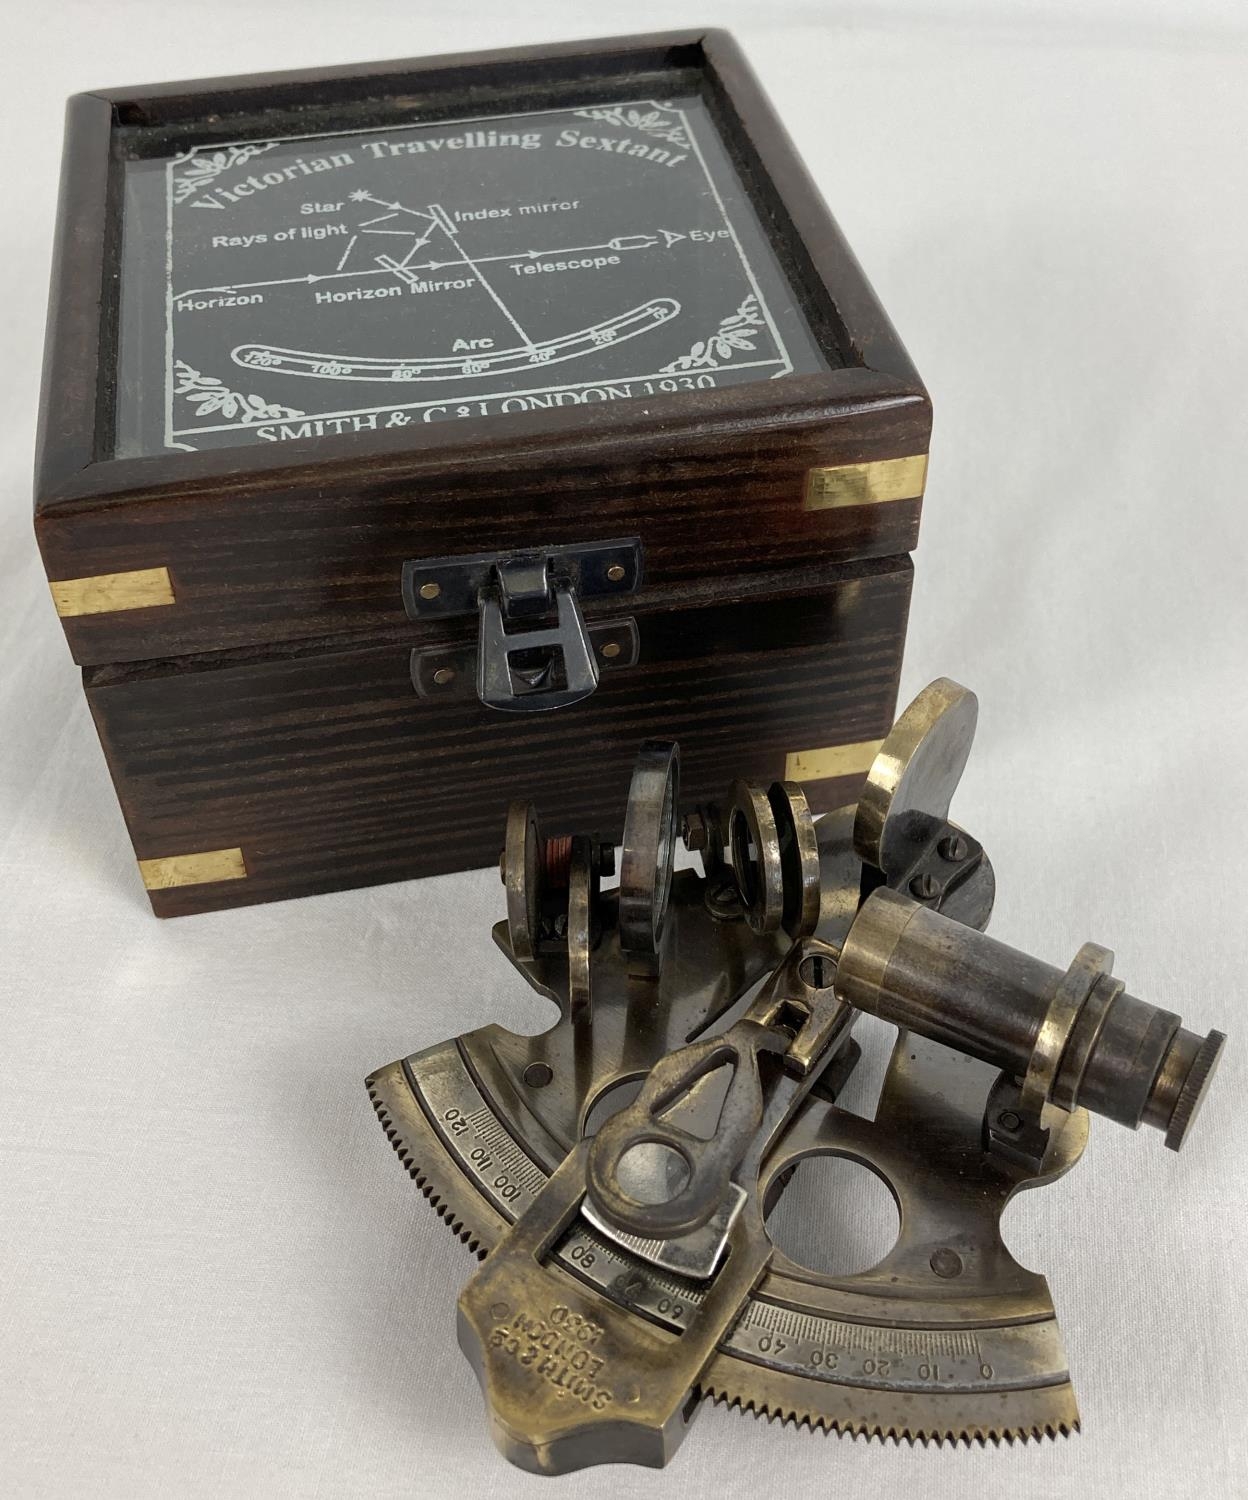 A replica wooden and glass lidded box containing a "Victorian Travelling Sextant" by Smith & Co.